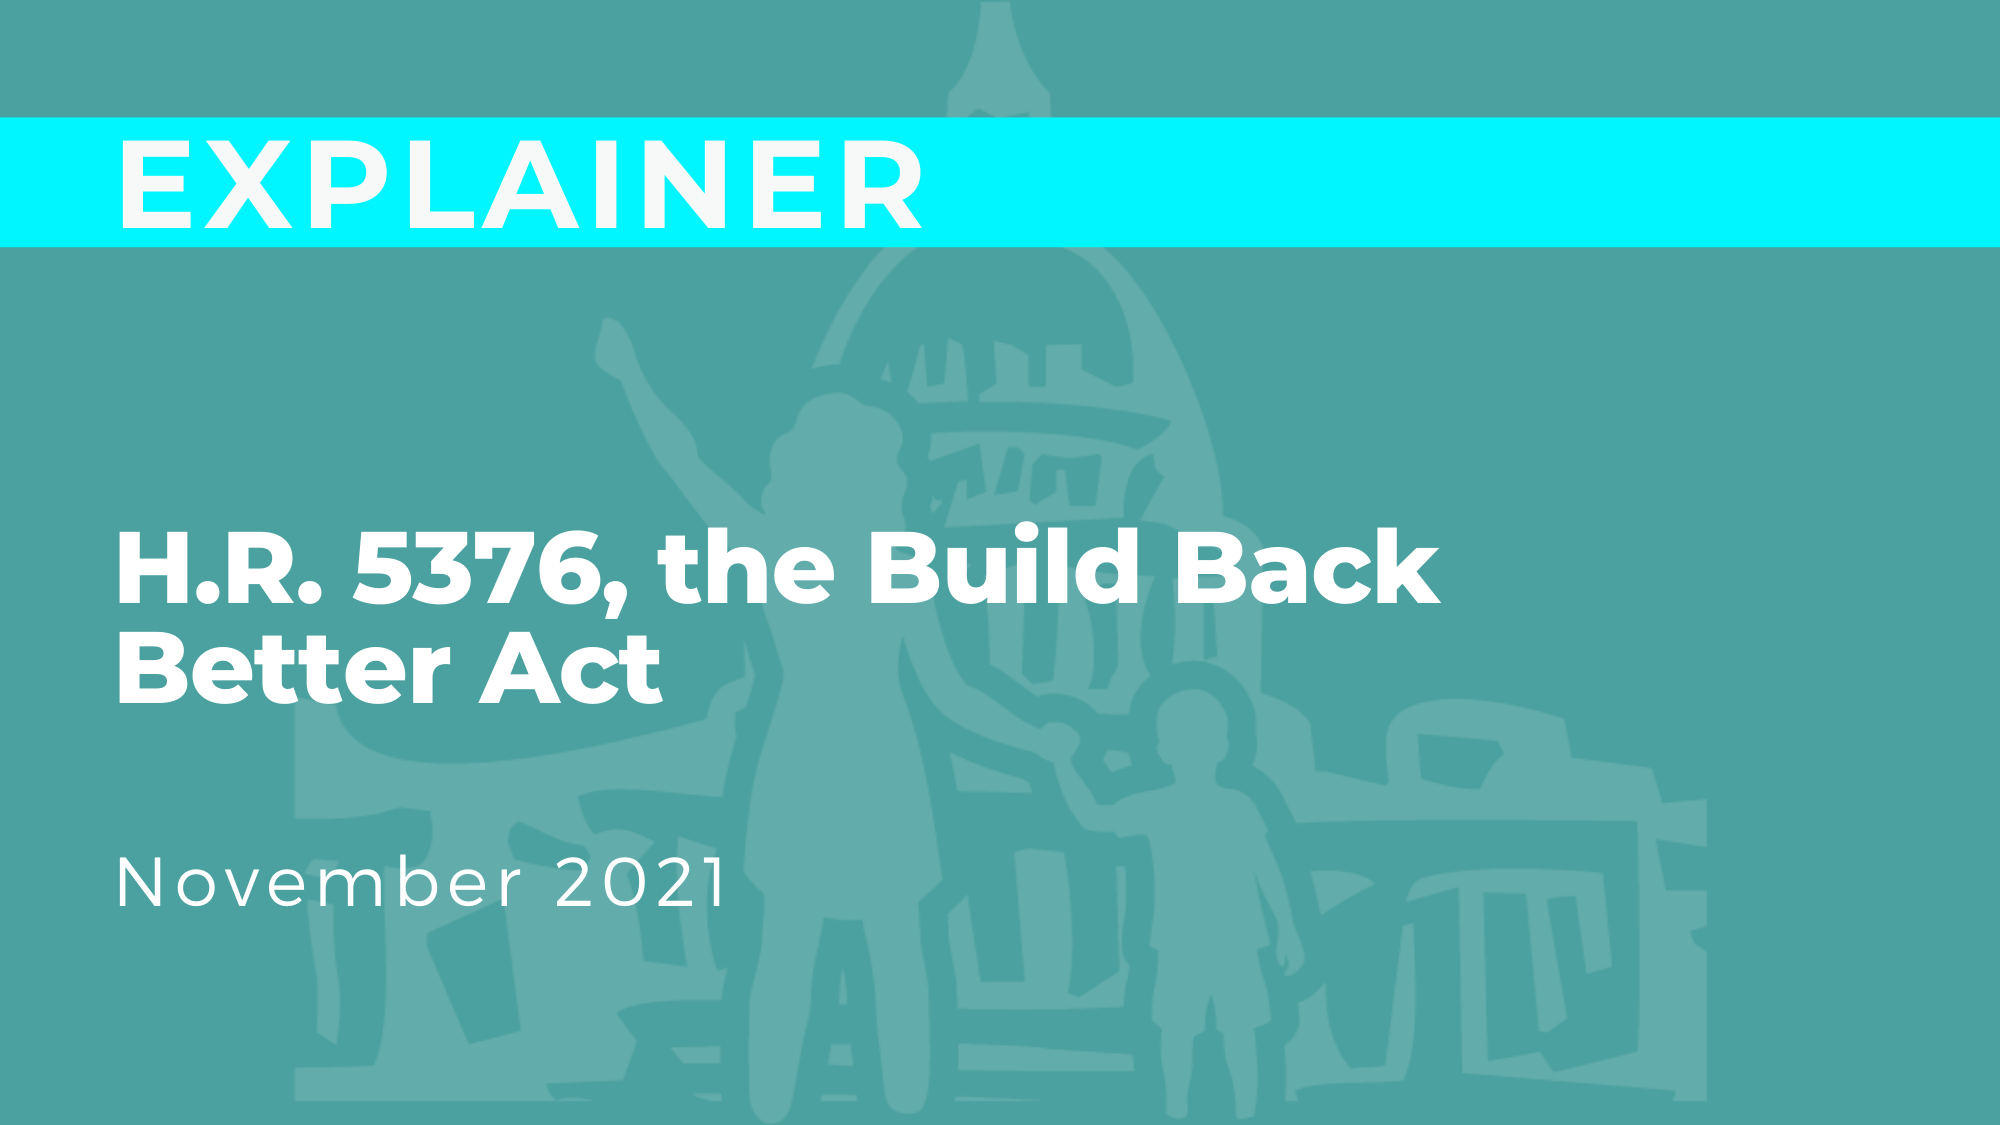 H.R. 5376, The Build Back Better Act